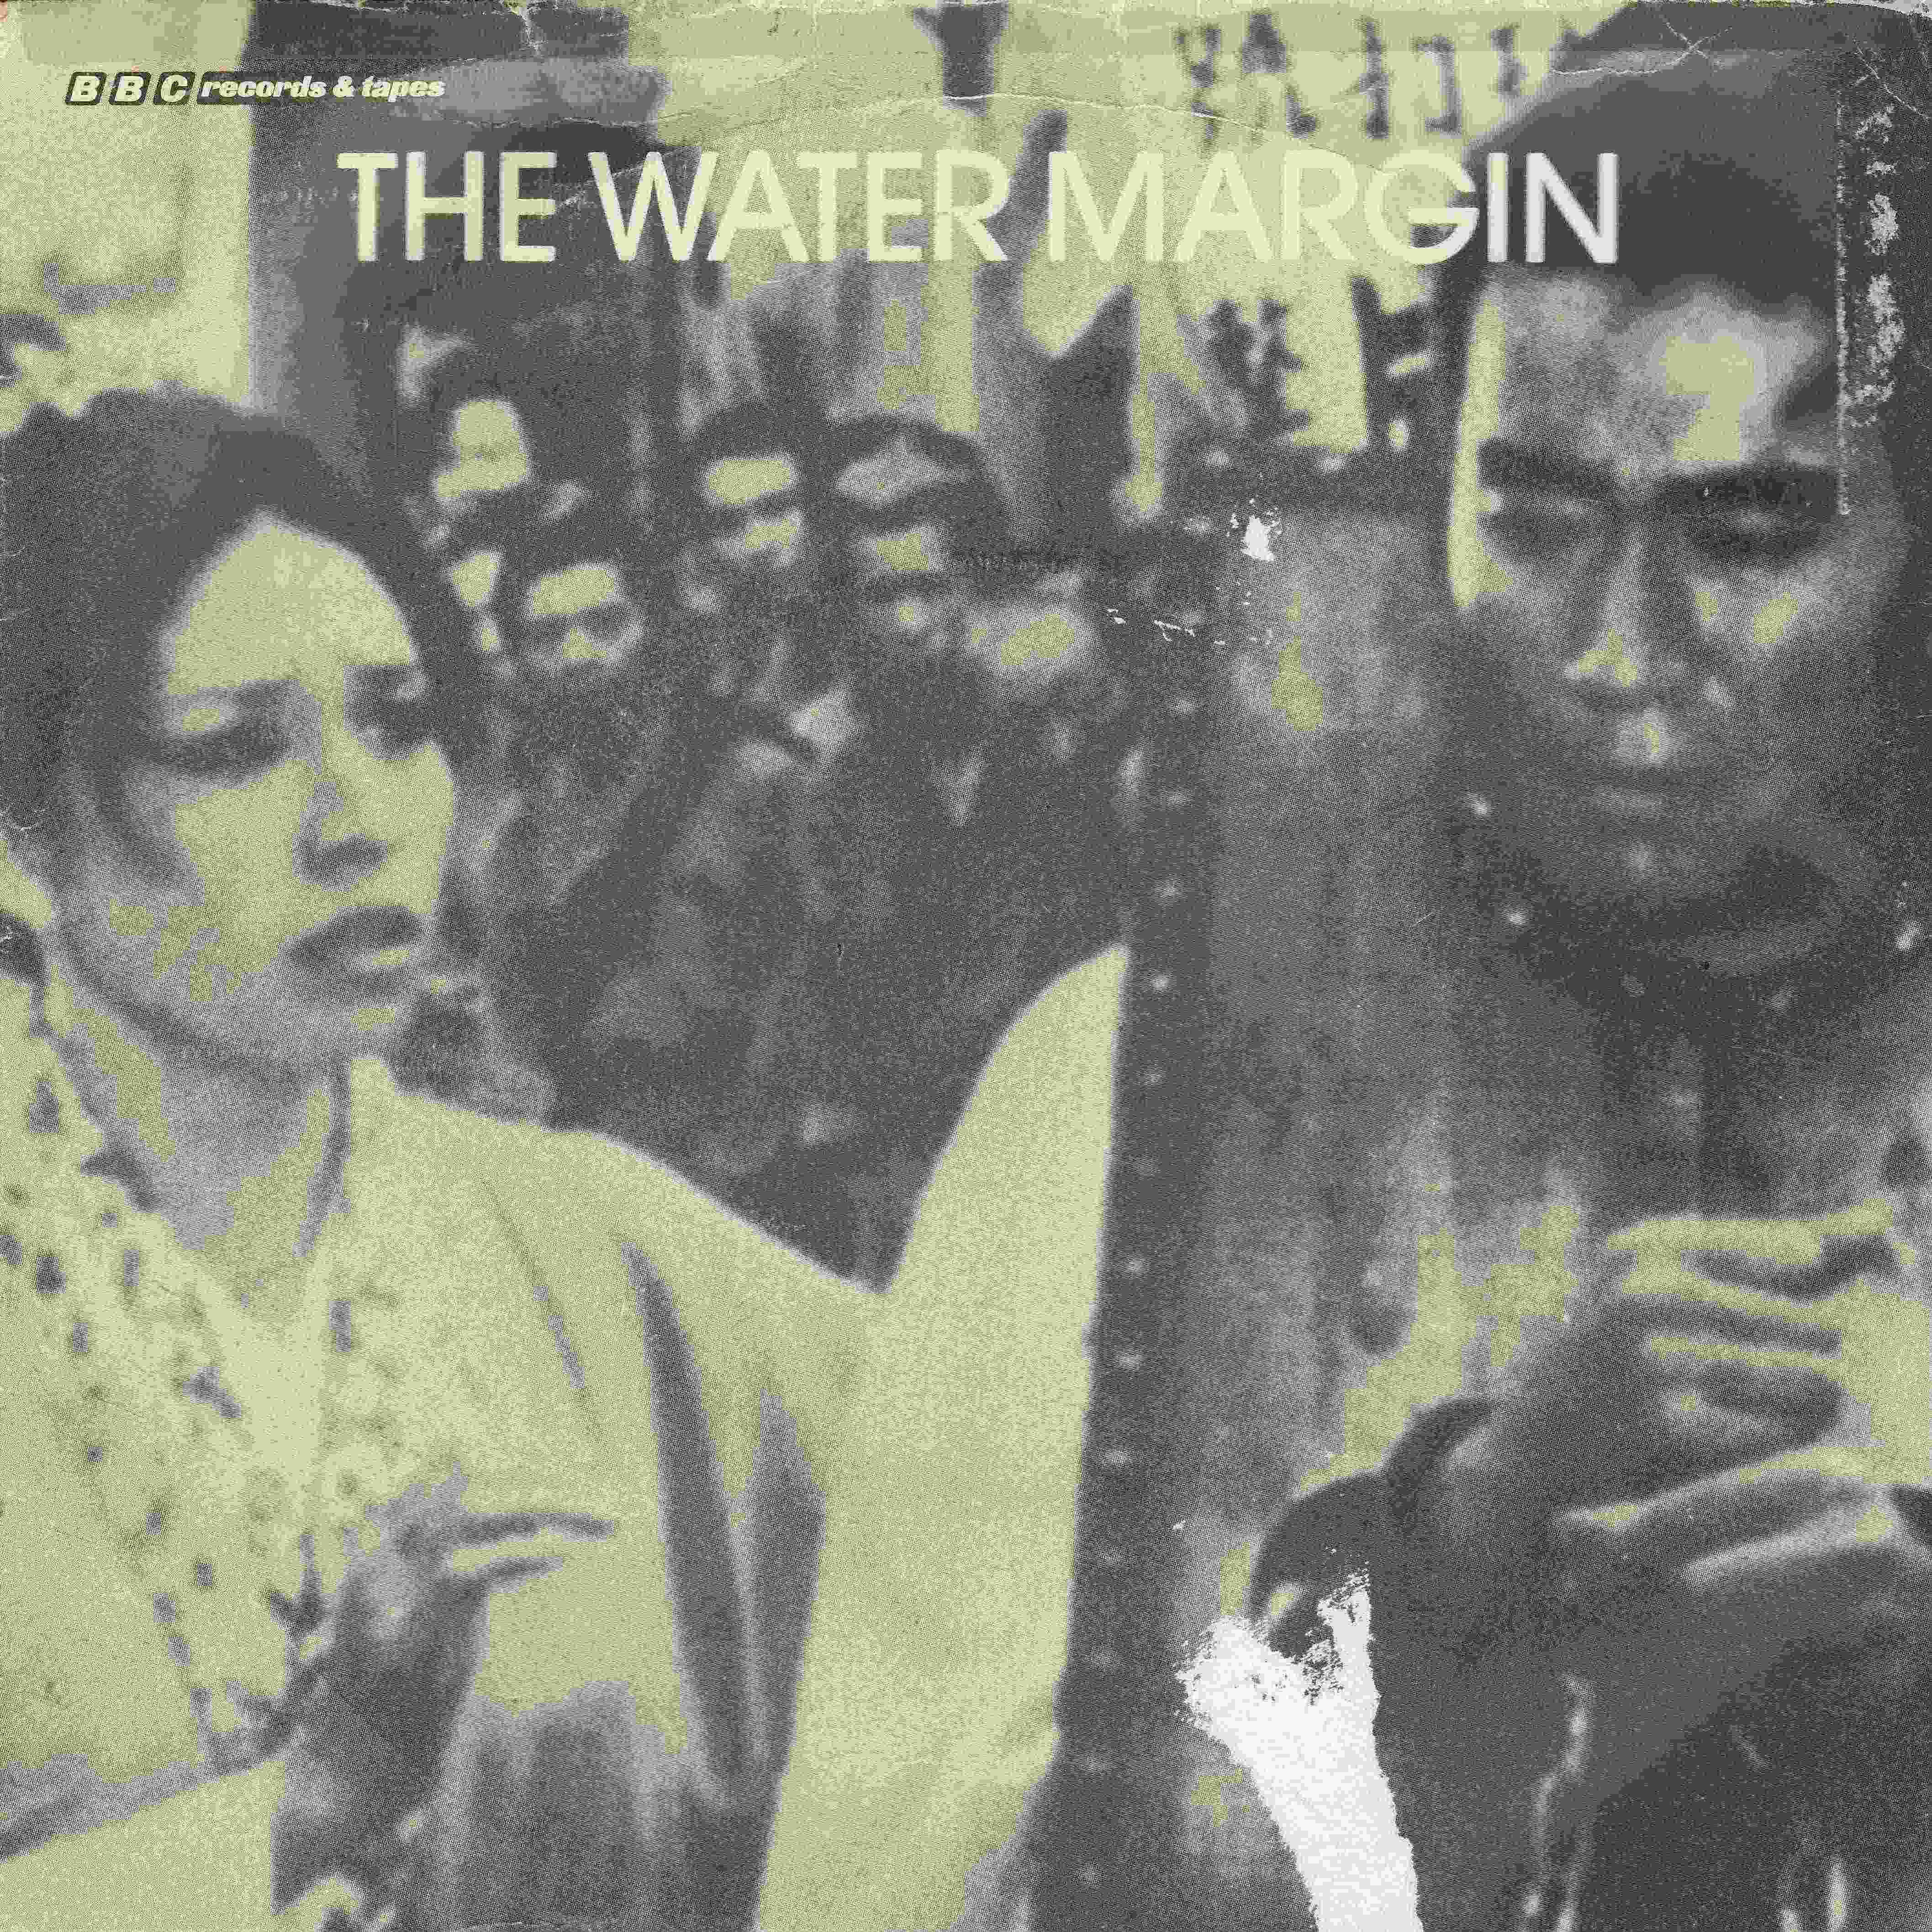 Picture of RESL 50 The water margin by artist Sato from the BBC singles - Records and Tapes library